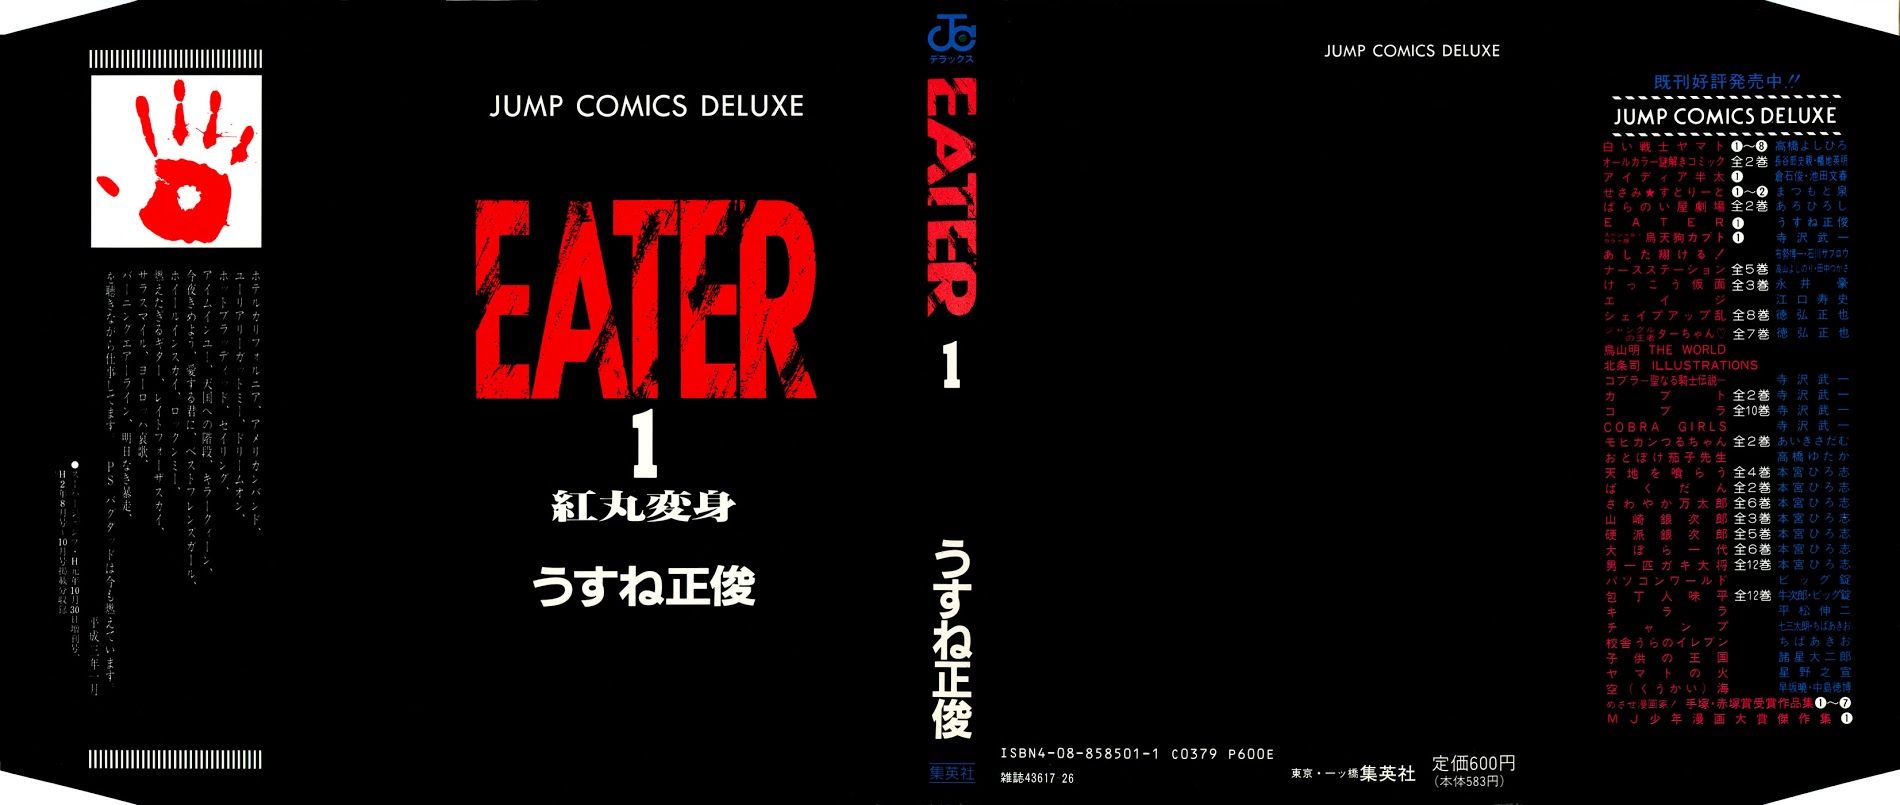 Eater Chapter 1 #3